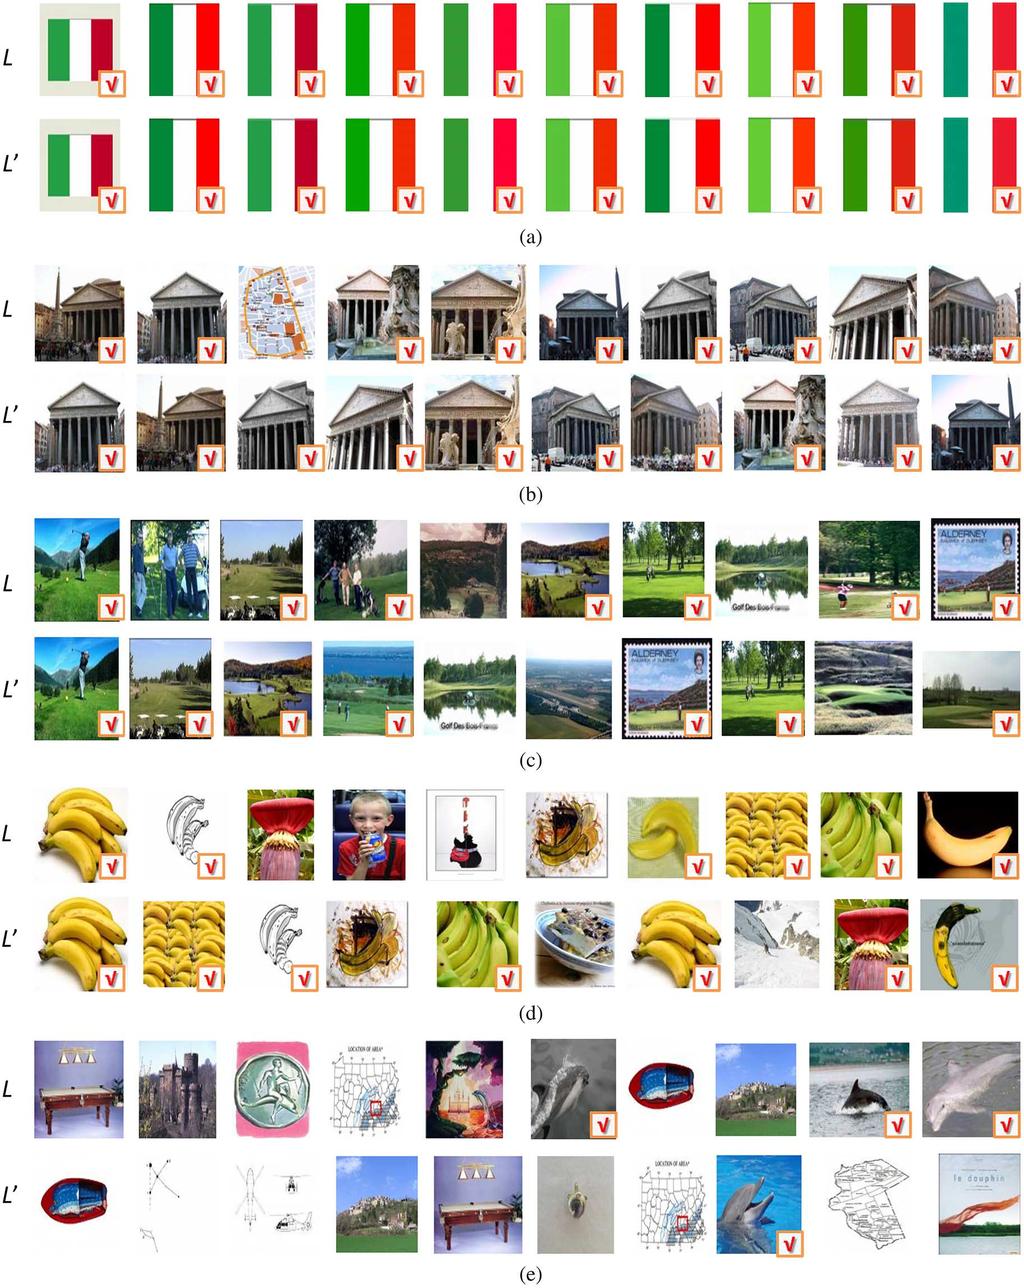 88 IEEE TRANSACTIONS ON MULTIMEDIA, VOL. 17, NO. 1, JANUARY 2015 Fig.5. Top10rankedimagesin and, ordered left to right. Query relevant images are marked by a red.